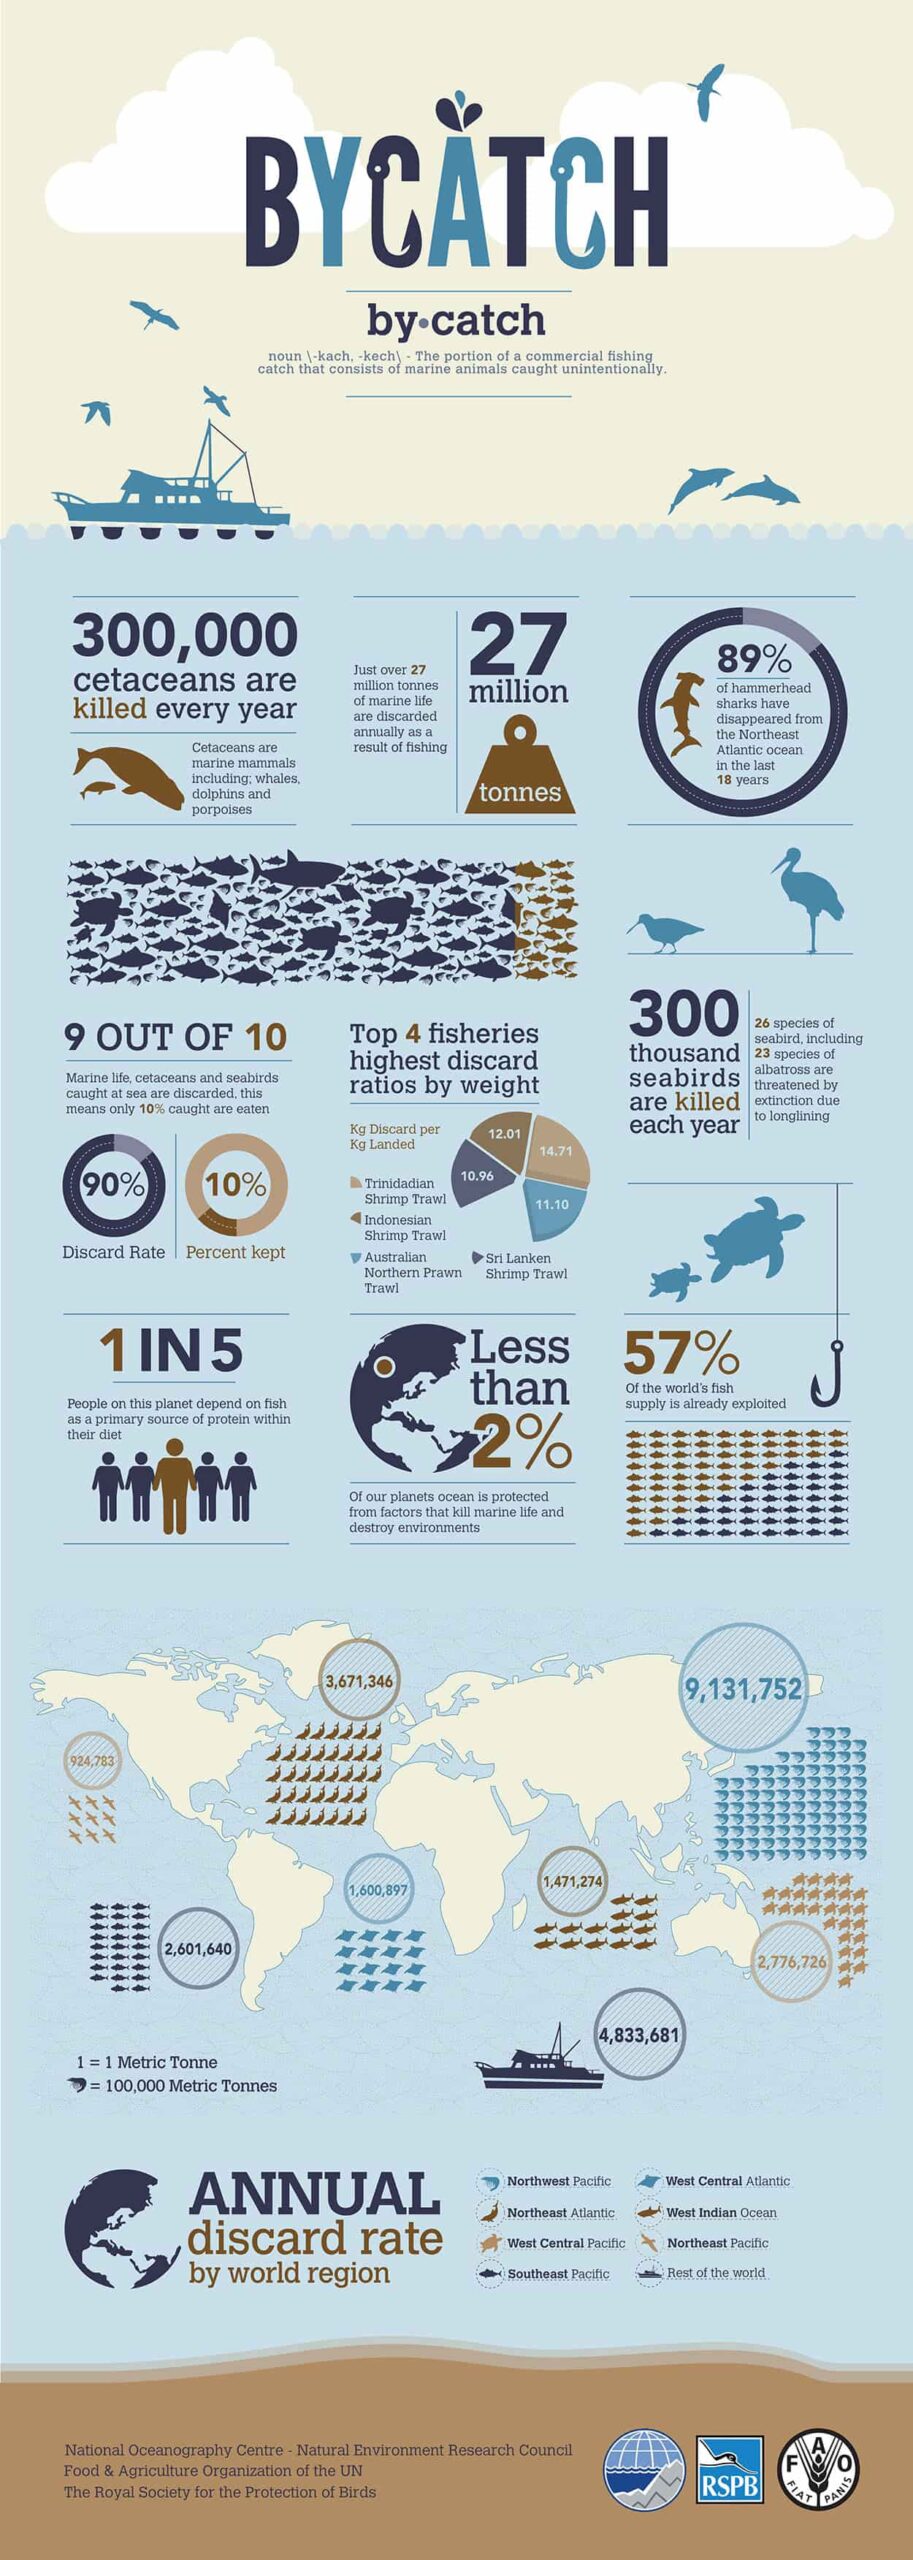 example of an infographic with data visualization - bycatch